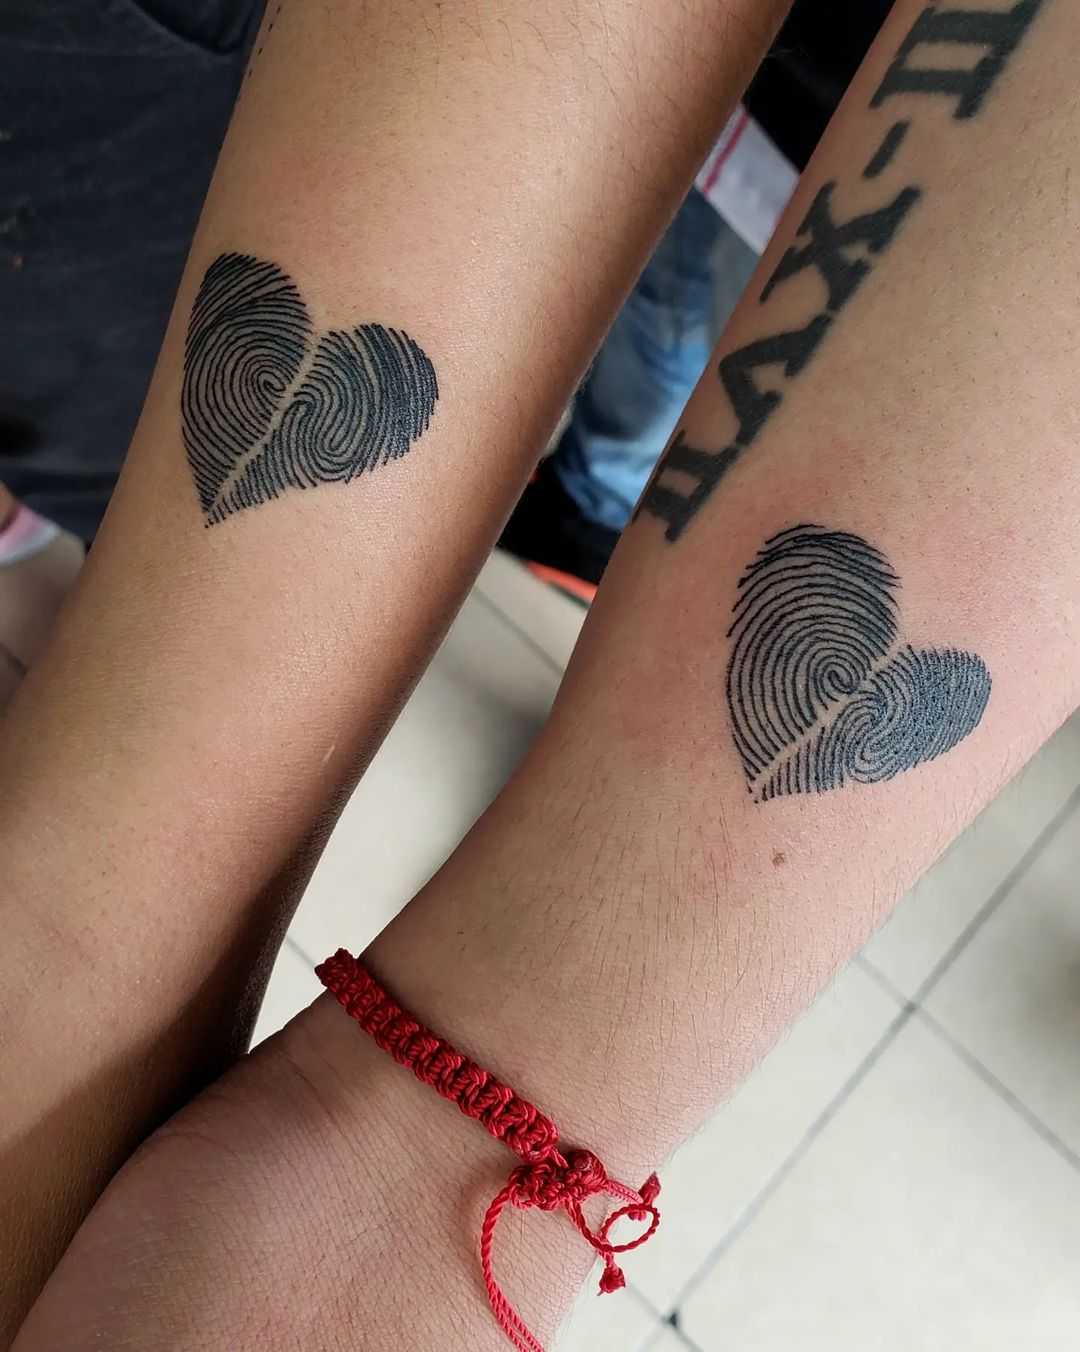 50 Matching Couple Tattoo Ideas To Try with Your Significant Other - Hairstylery